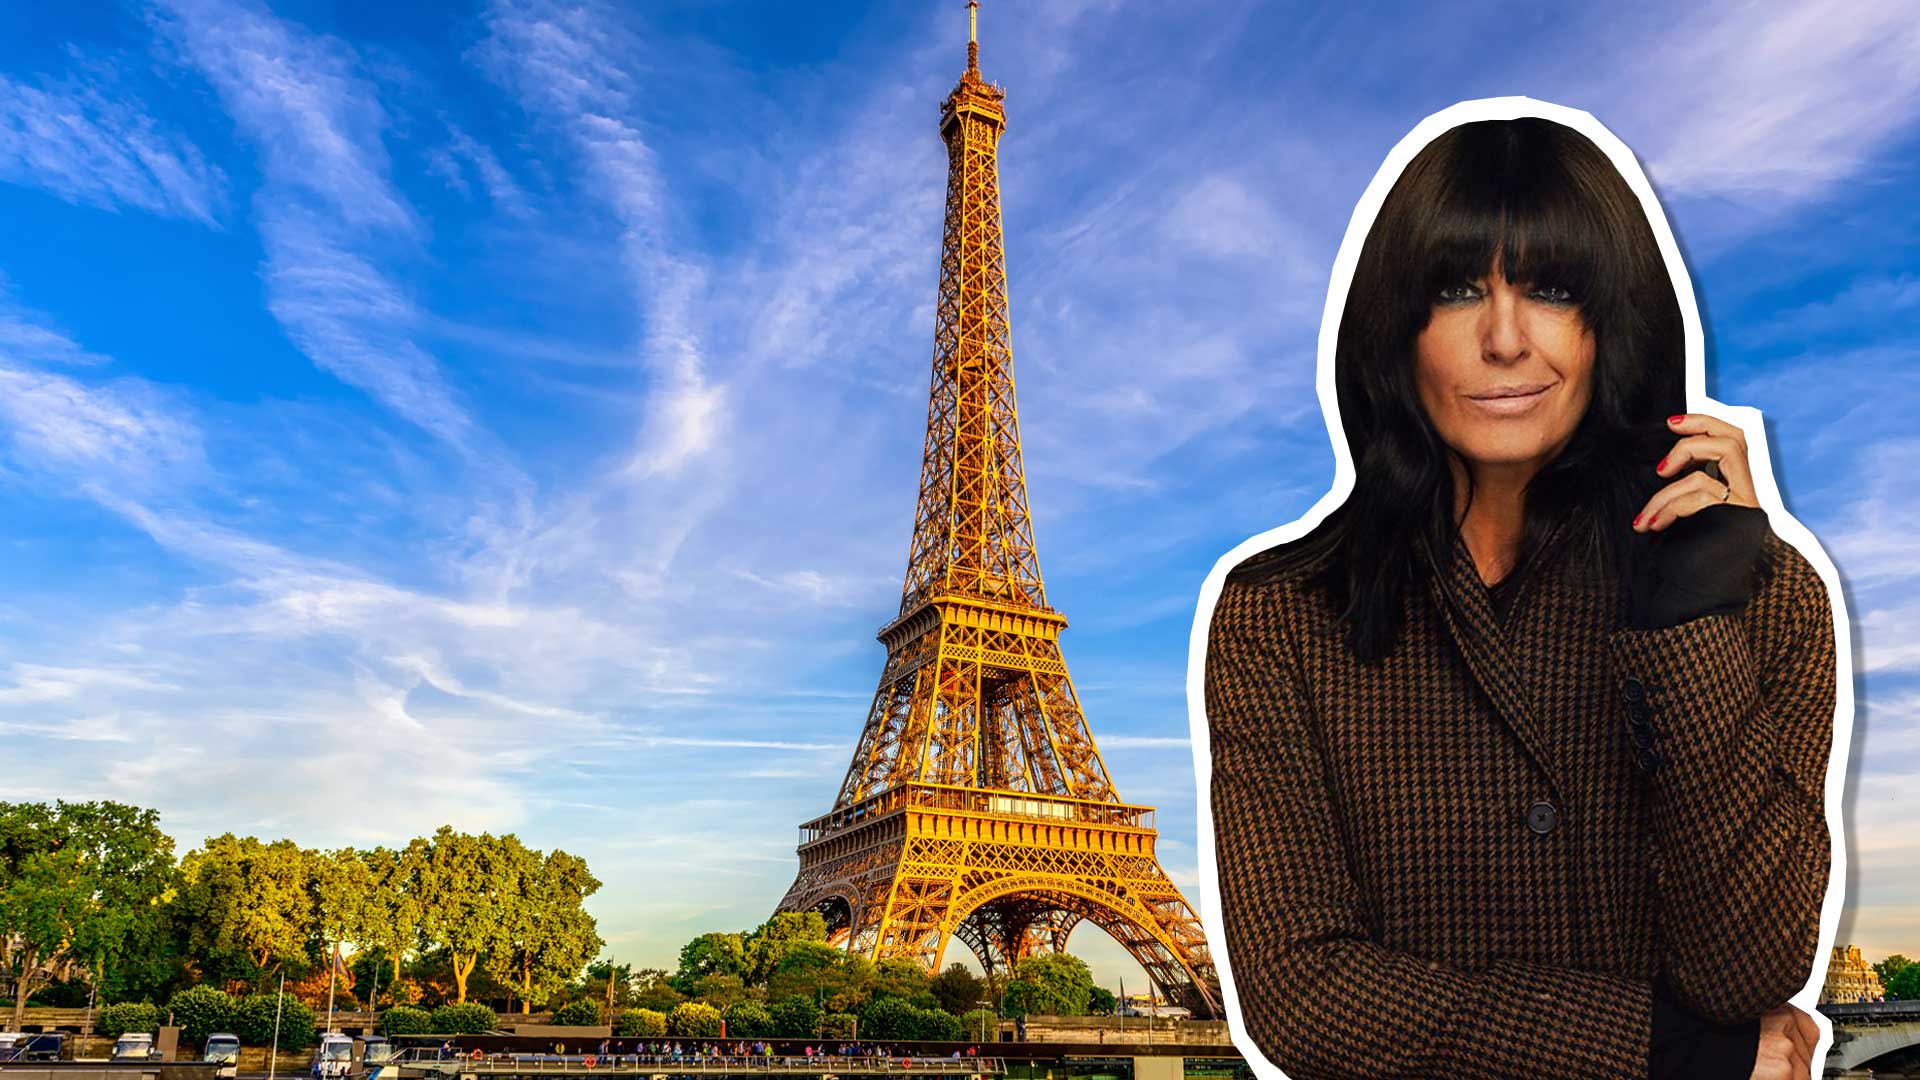 Claudia Winkleman in front of the Eiffel Tower